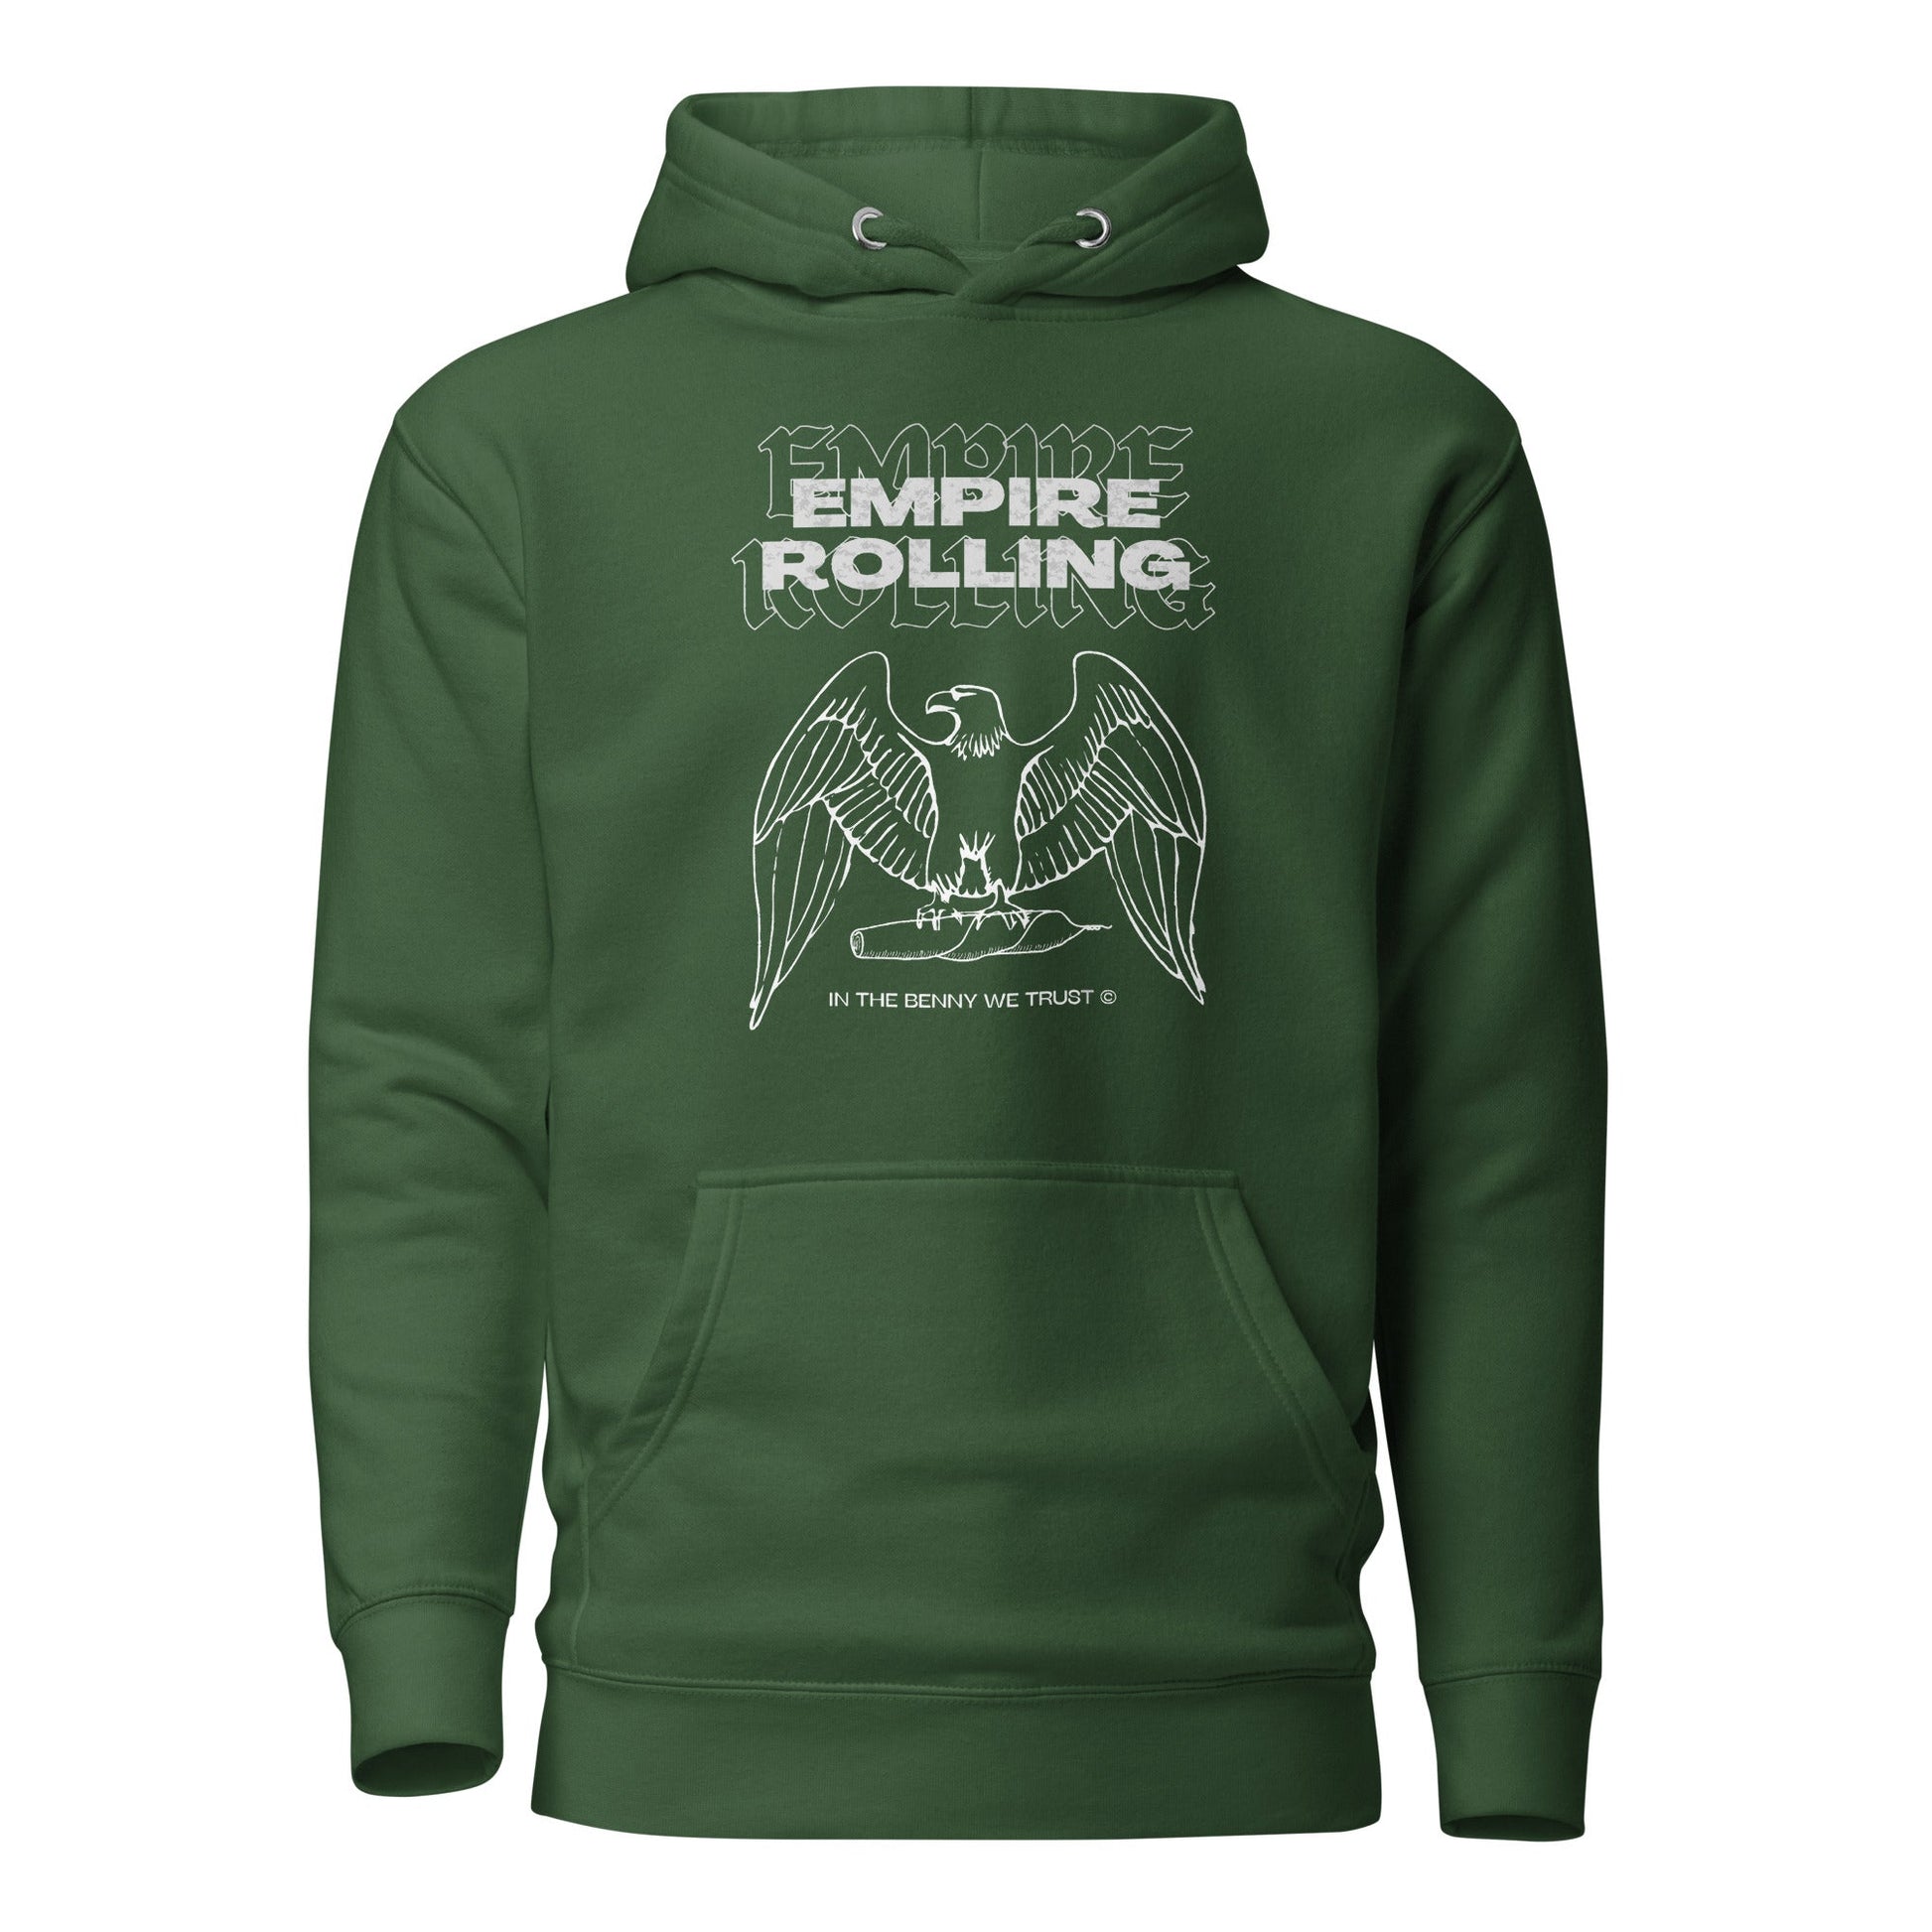 Empire Rolling's King Size Organic Hemp Rolling Papers, eco-friendly and crafted with high-quality, natural materials for a premium smoking experience.Benny's Dominion Hoodie - Empire Rolling Papers